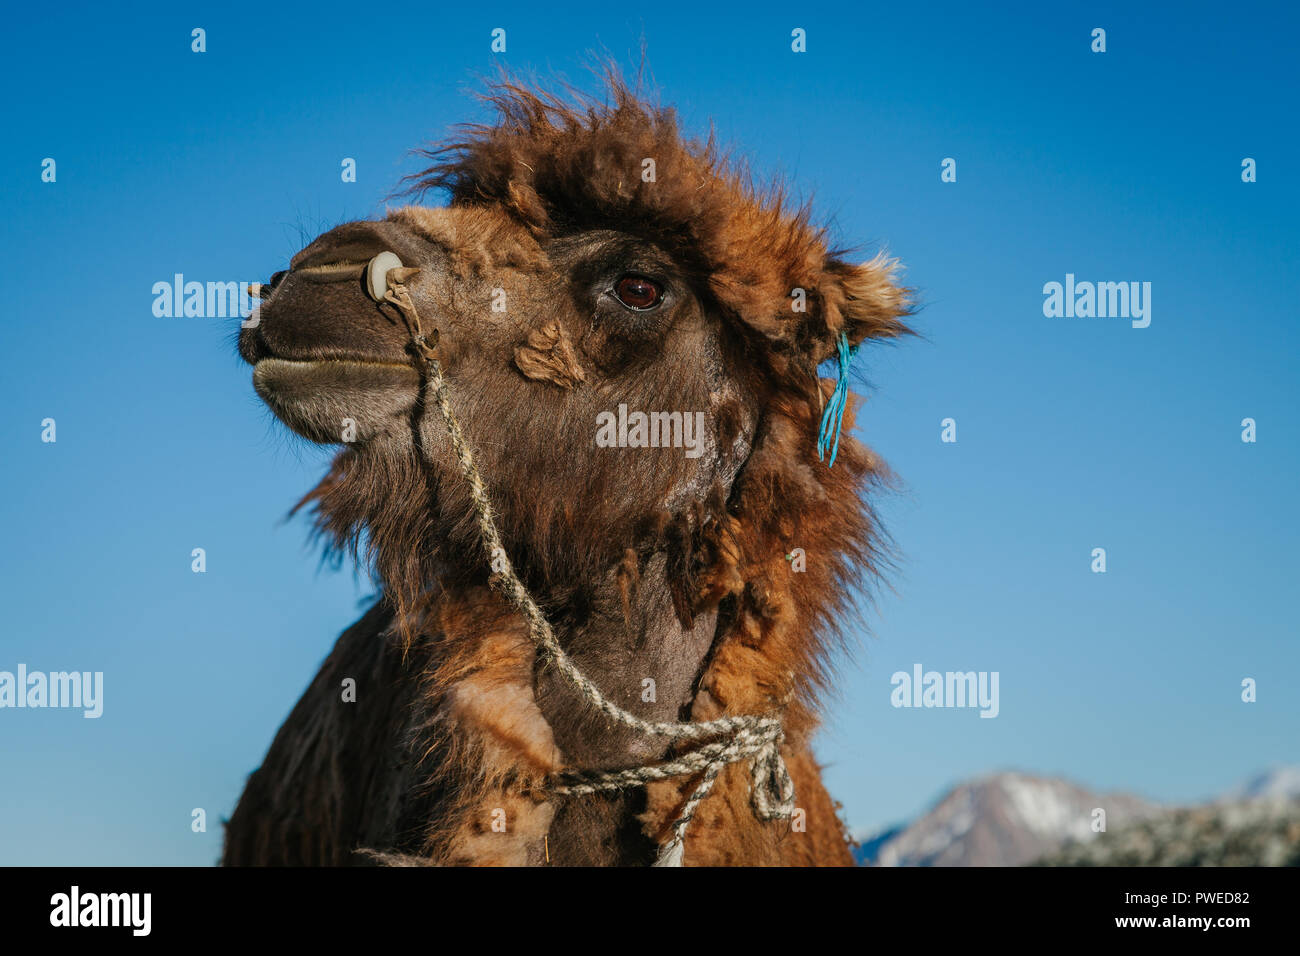 Closeup portrait of a Mongolian, Bactrian camel outside with blue sky and mountains in background. Bayan Olgii, Mongolia Stock Photo